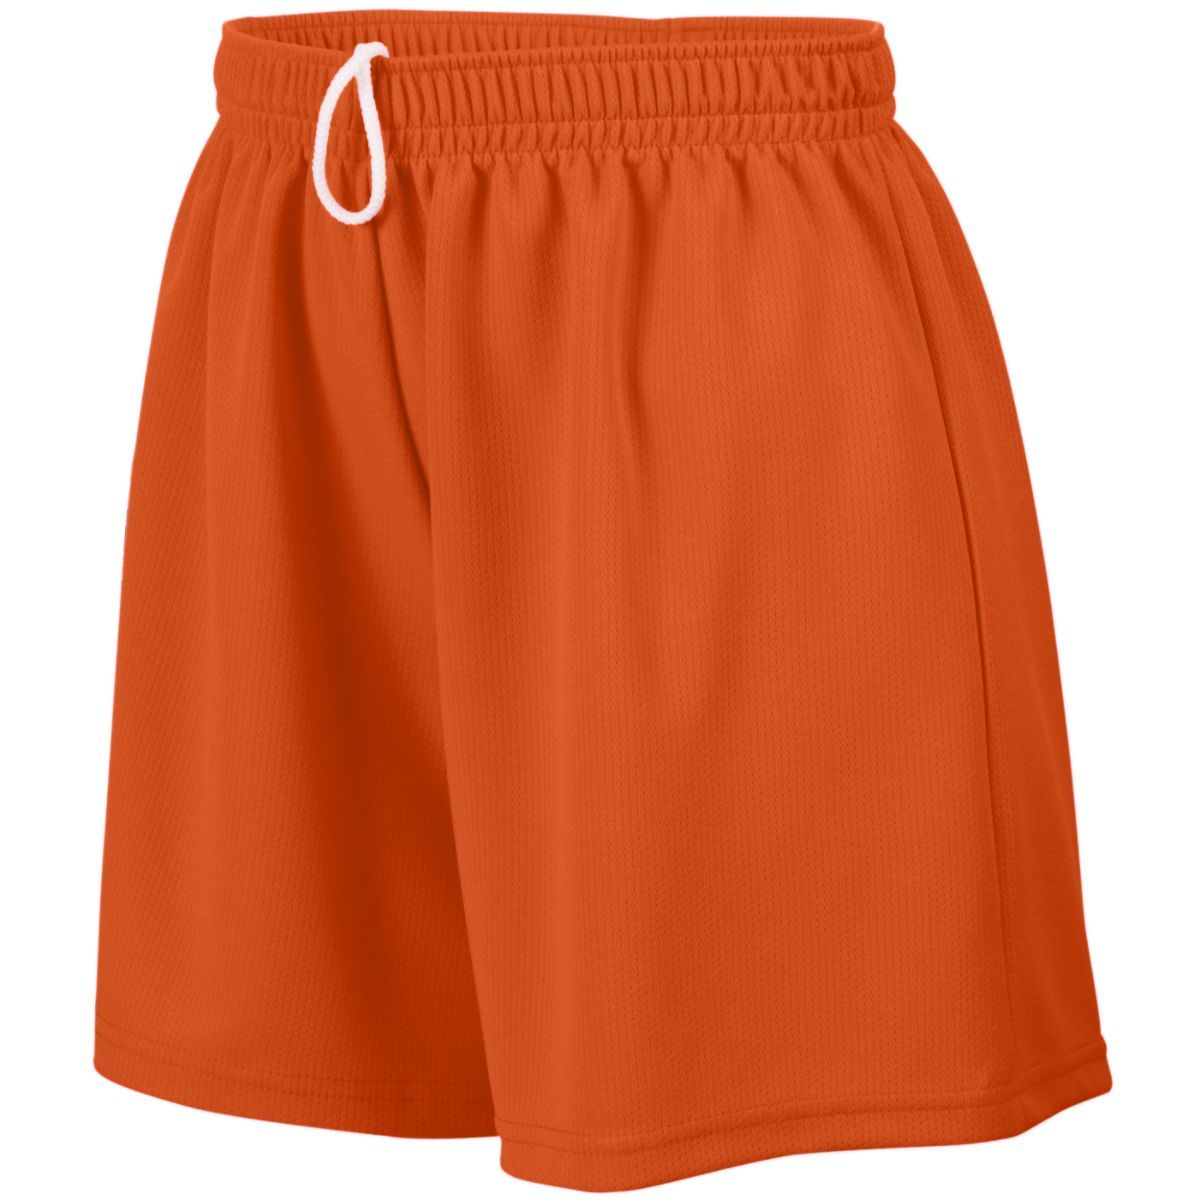 Augusta Sportswear Girls Wicking Mesh Shorts in Orange  -Part of the Girls, Augusta-Products, Lacrosse, Girls-Shorts, All-Sports, All-Sports-1 product lines at KanaleyCreations.com